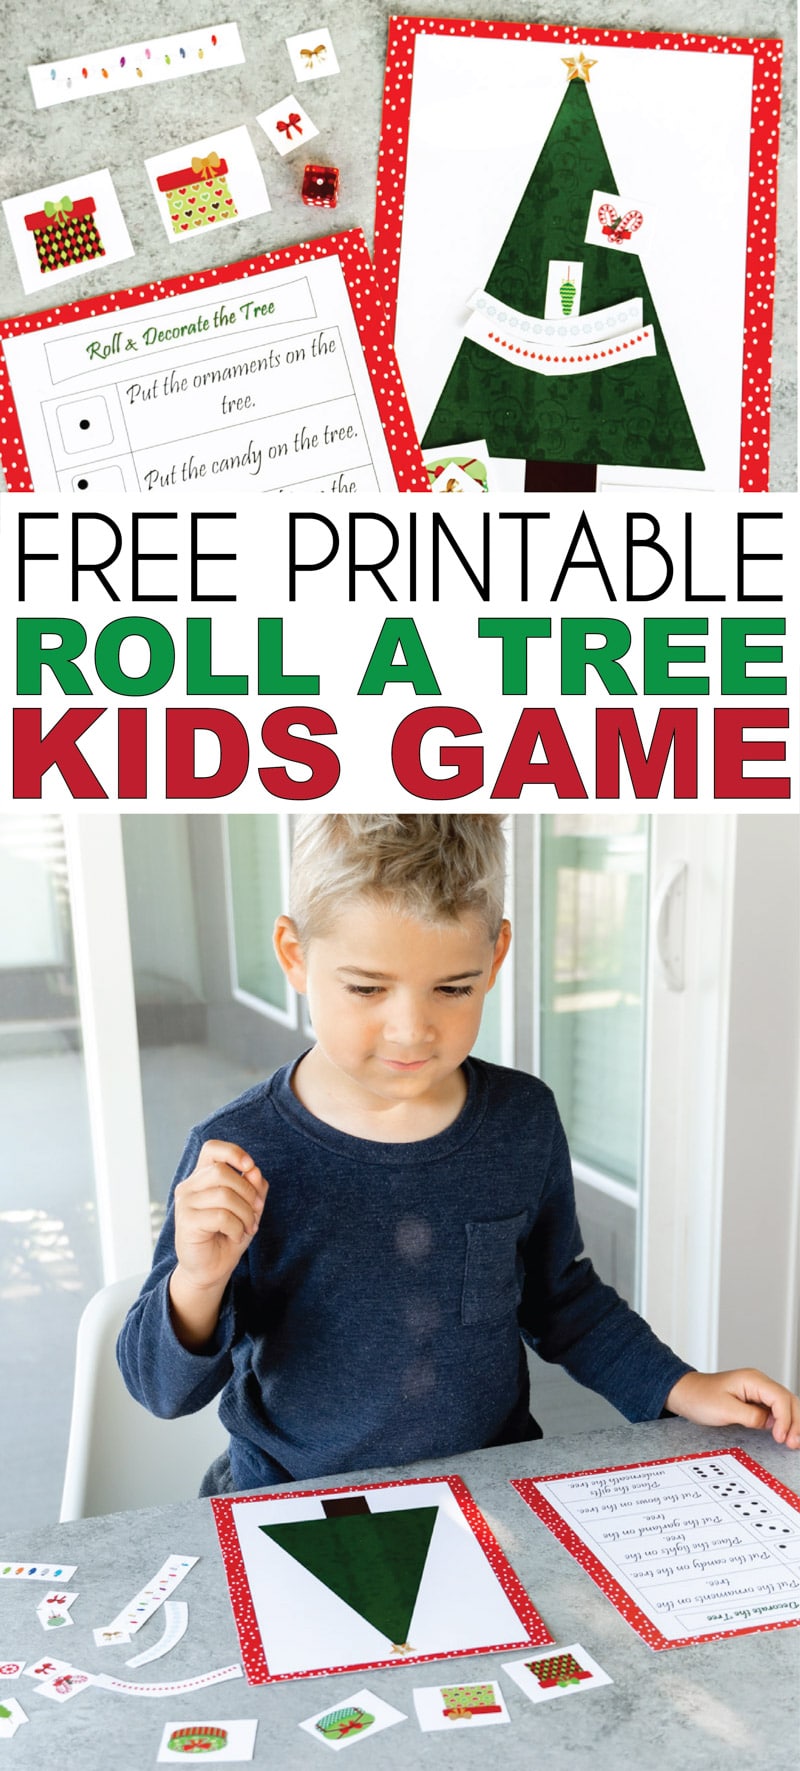 This roll a Christmas tree game is so fun for kids! Perfect for a classroom party for preschoolers, kindergarten, or even elementary school! One of the best Christmas games for kids!